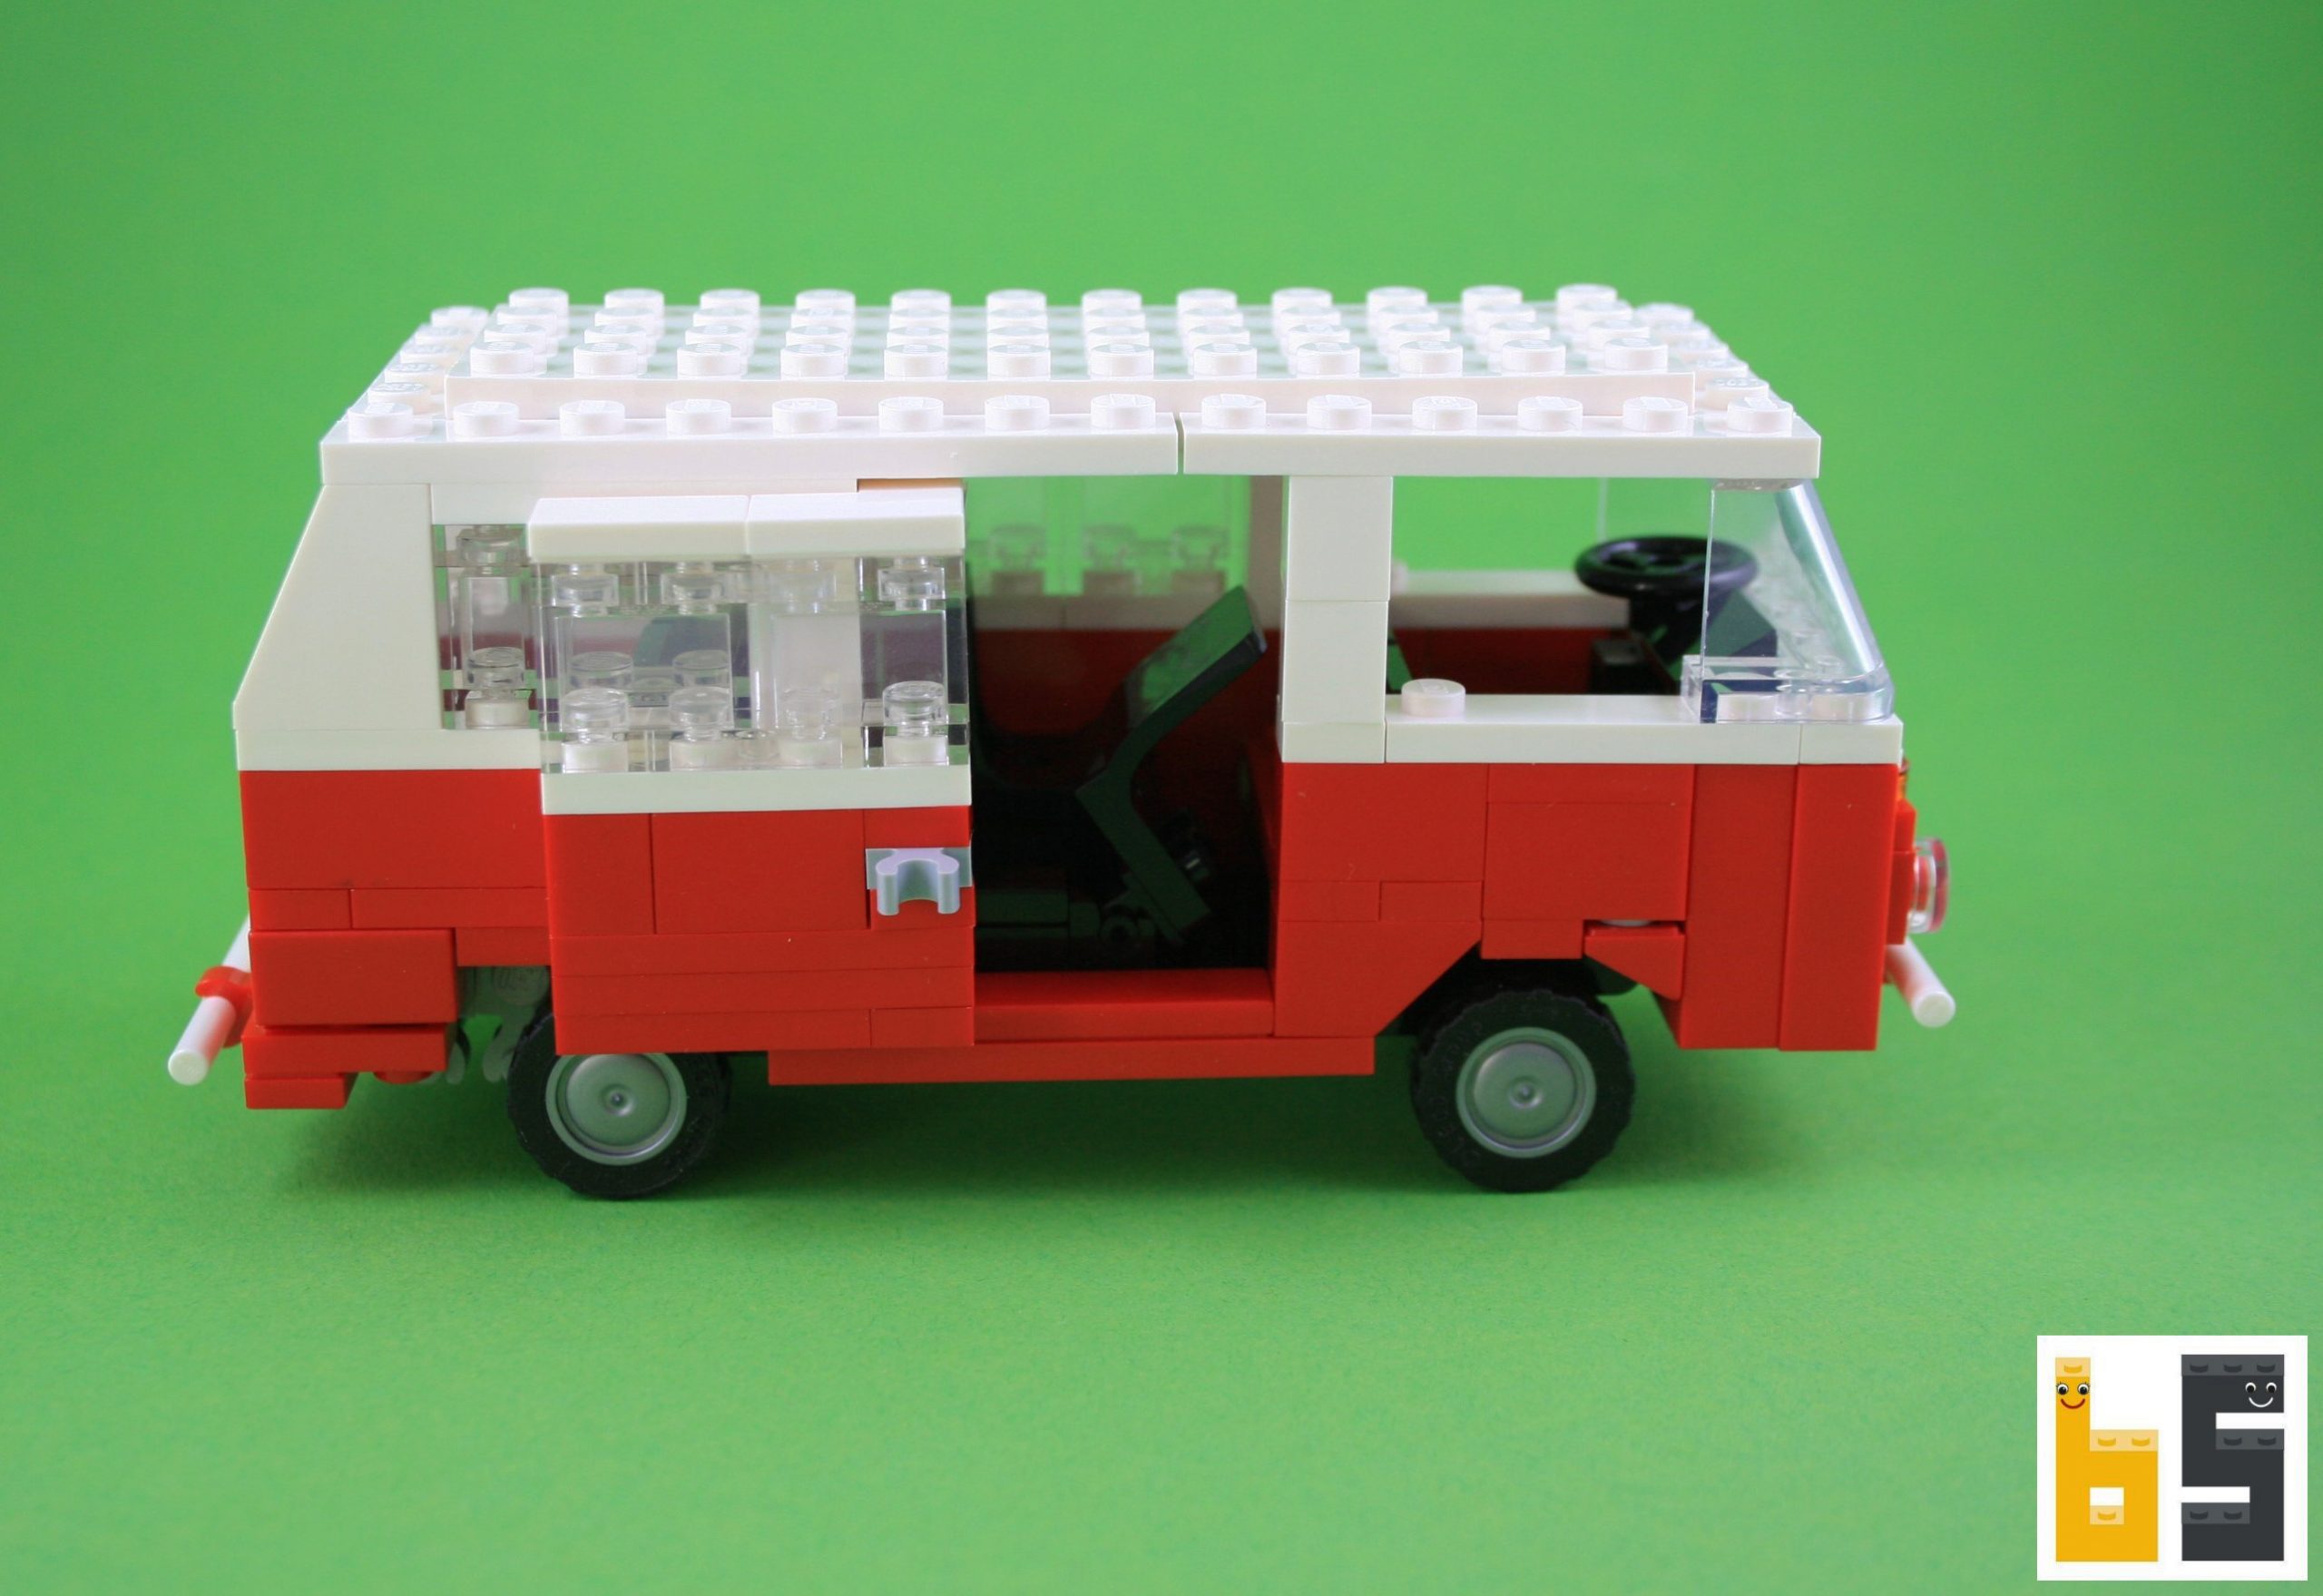 https://www.thebrickworms.com/wp-content/uploads/2021/01/lego-moc-vw-bus-typ2-red-rot-03-scaled.jpg